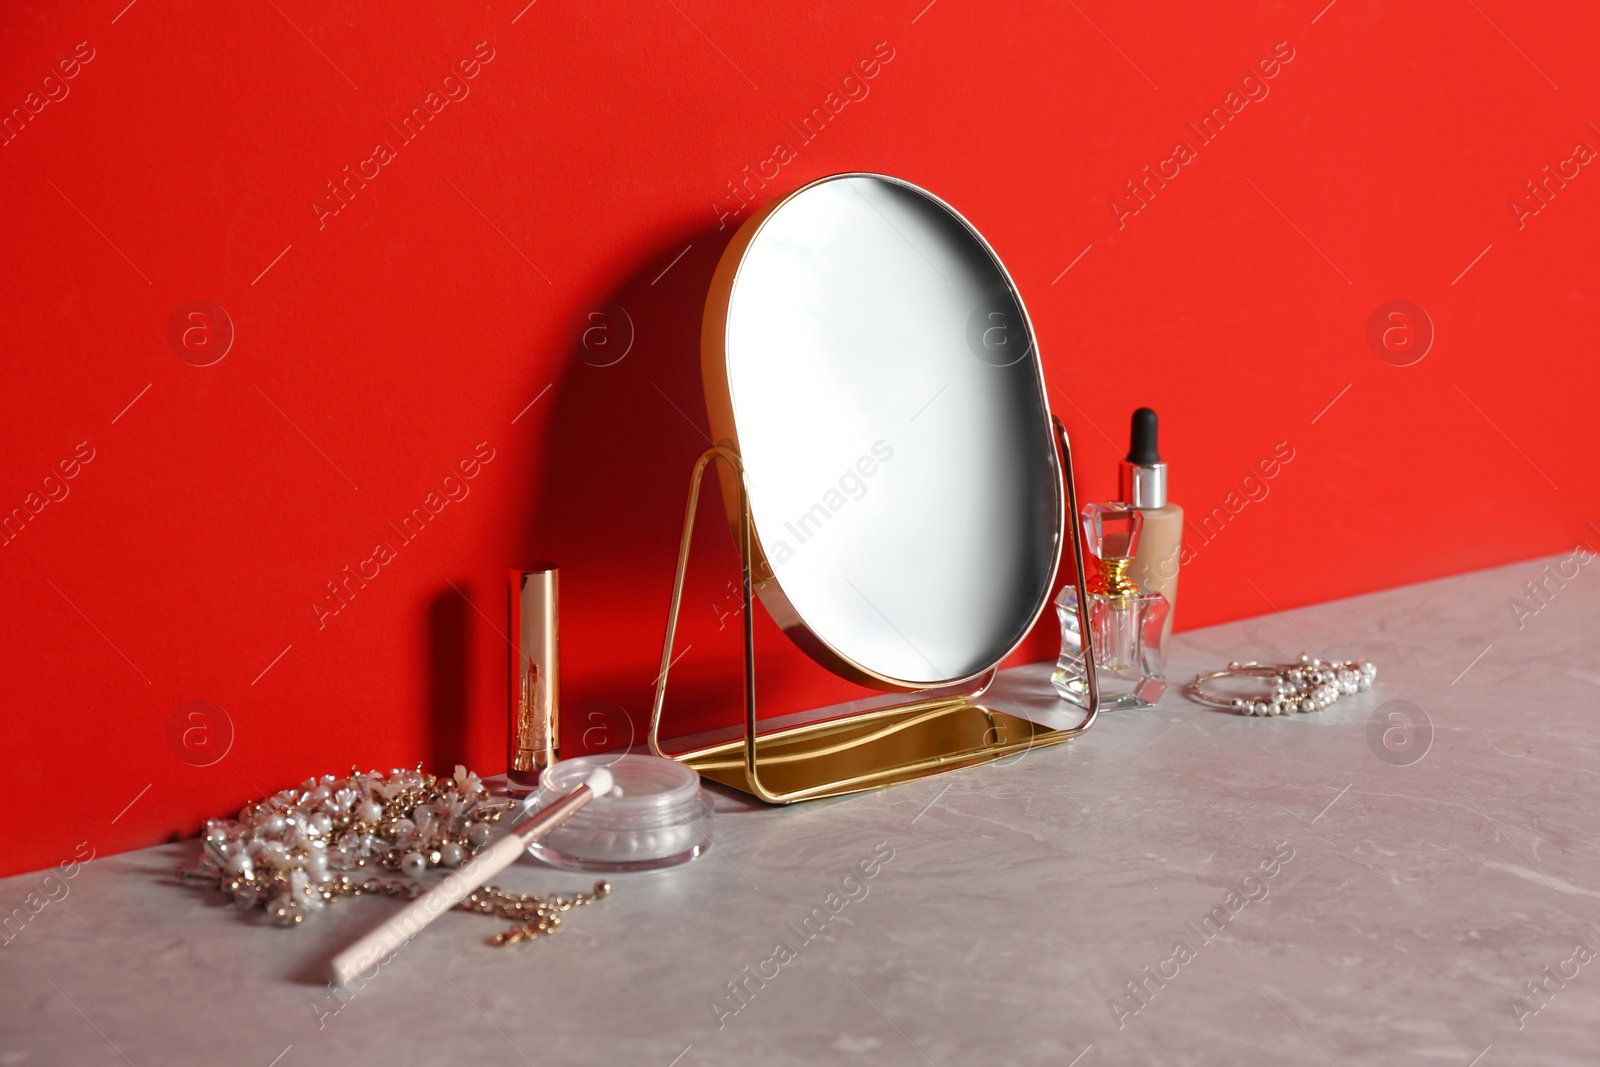 Photo of Small mirror, makeup products and jewelry on grey marble table near red wall